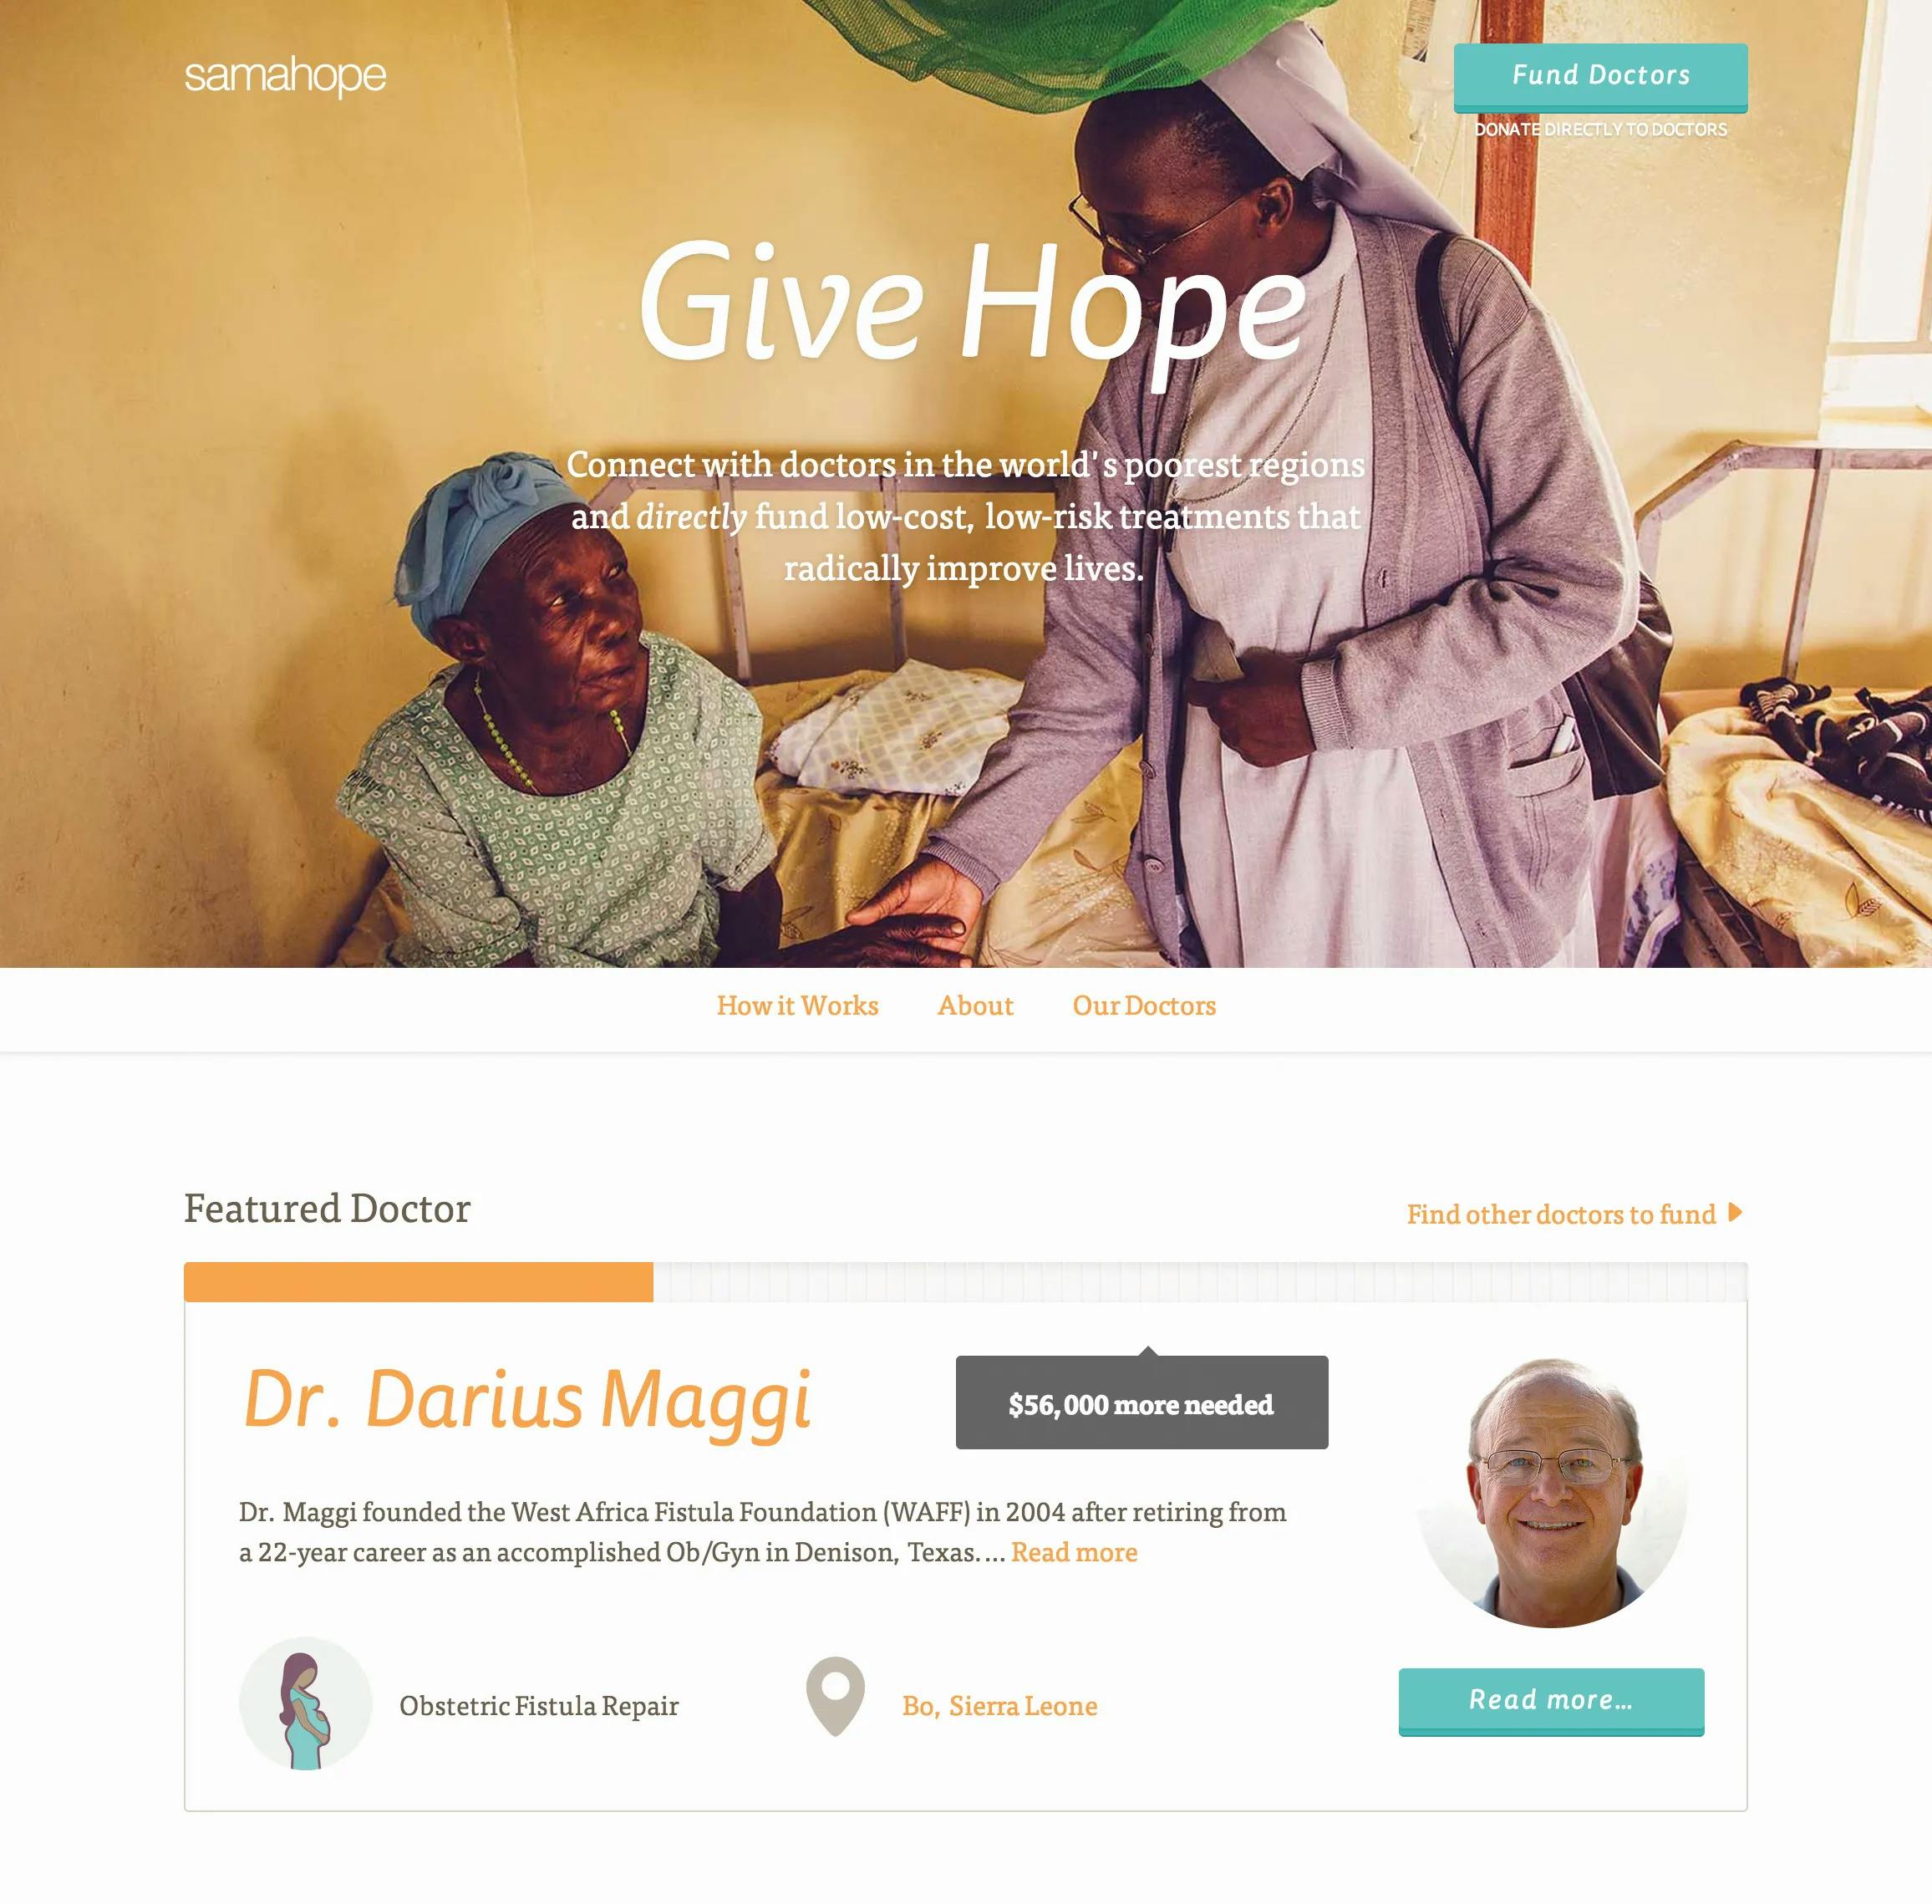 A crowdfunding site for doctors providing life-saving care to women and children